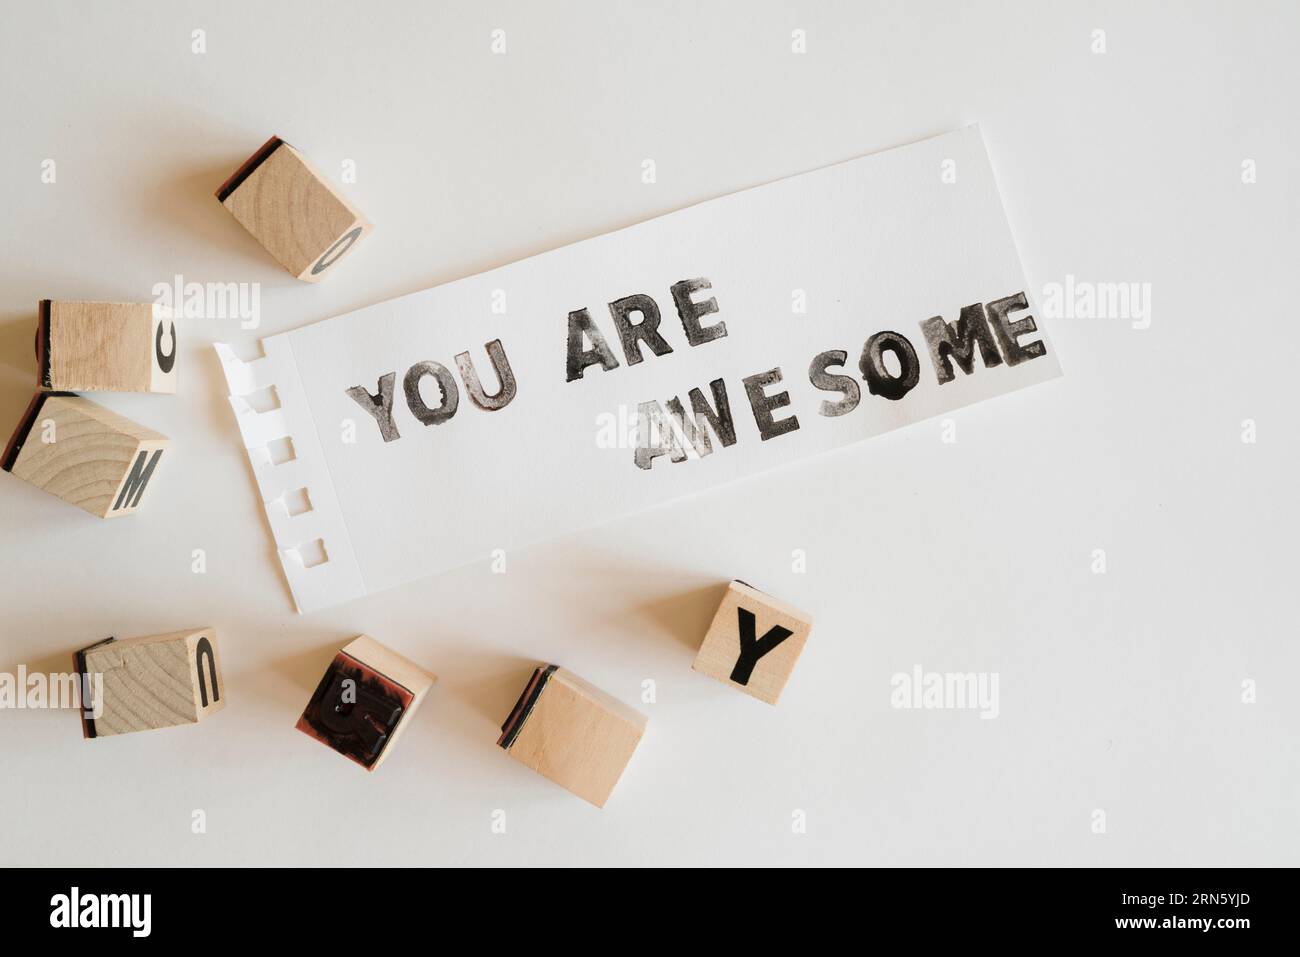 Text you are awesome with stamps Stock Photo